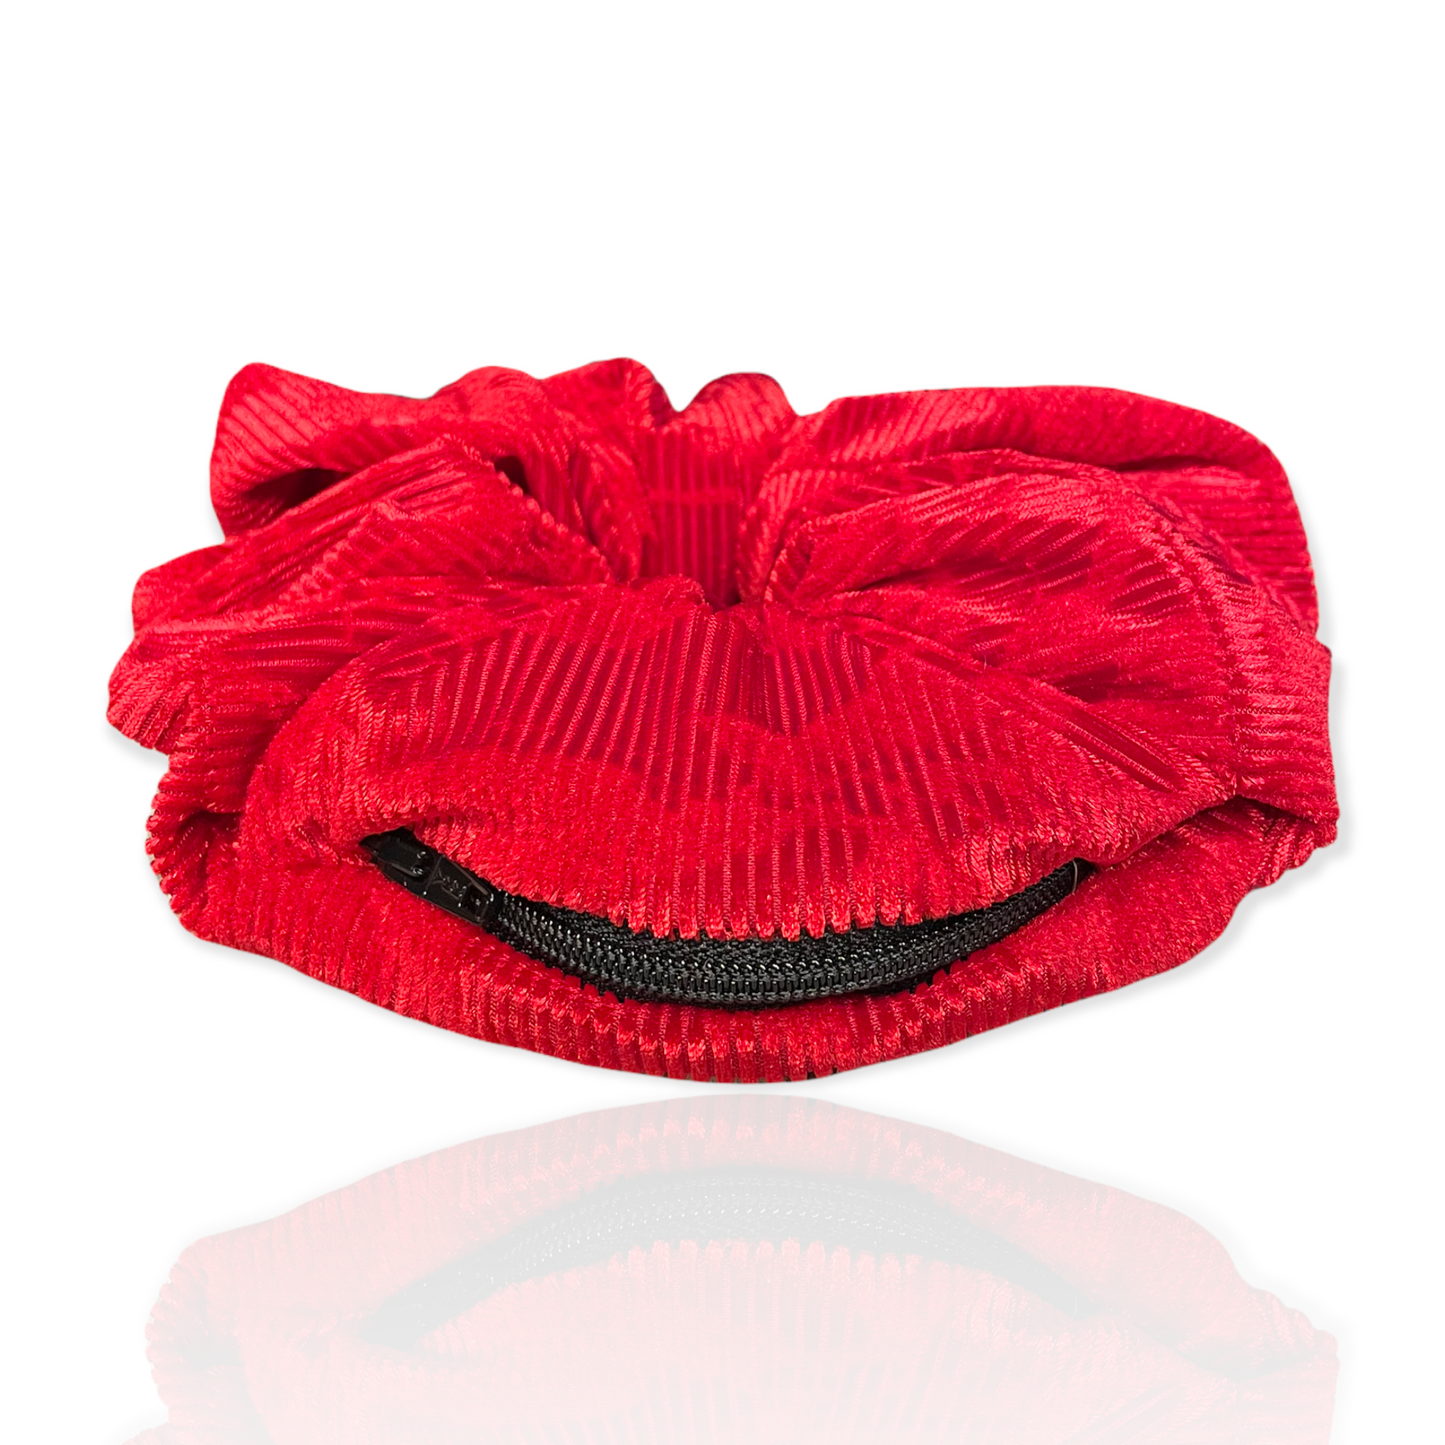 Oversized red corduroy scrunchie with hidden zipper for small items.